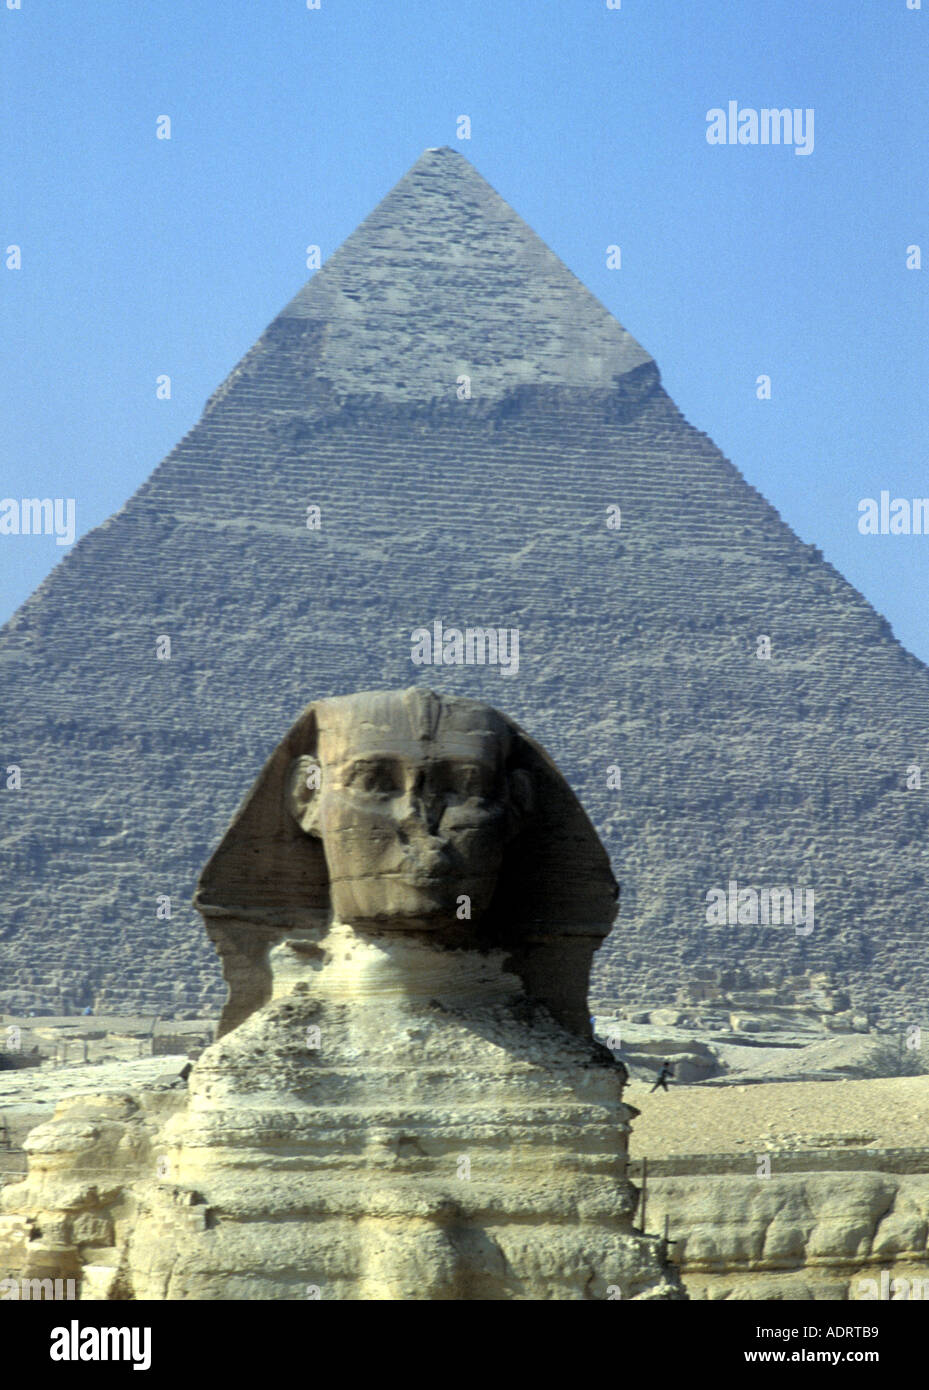 Sphinx and the Pyramid of Khafre Chephren) second-tallest of the Pyramids of Giza and tomb of 4th dynasty Pharaoh Khafre, 2558−2532 BCE Stock Photo